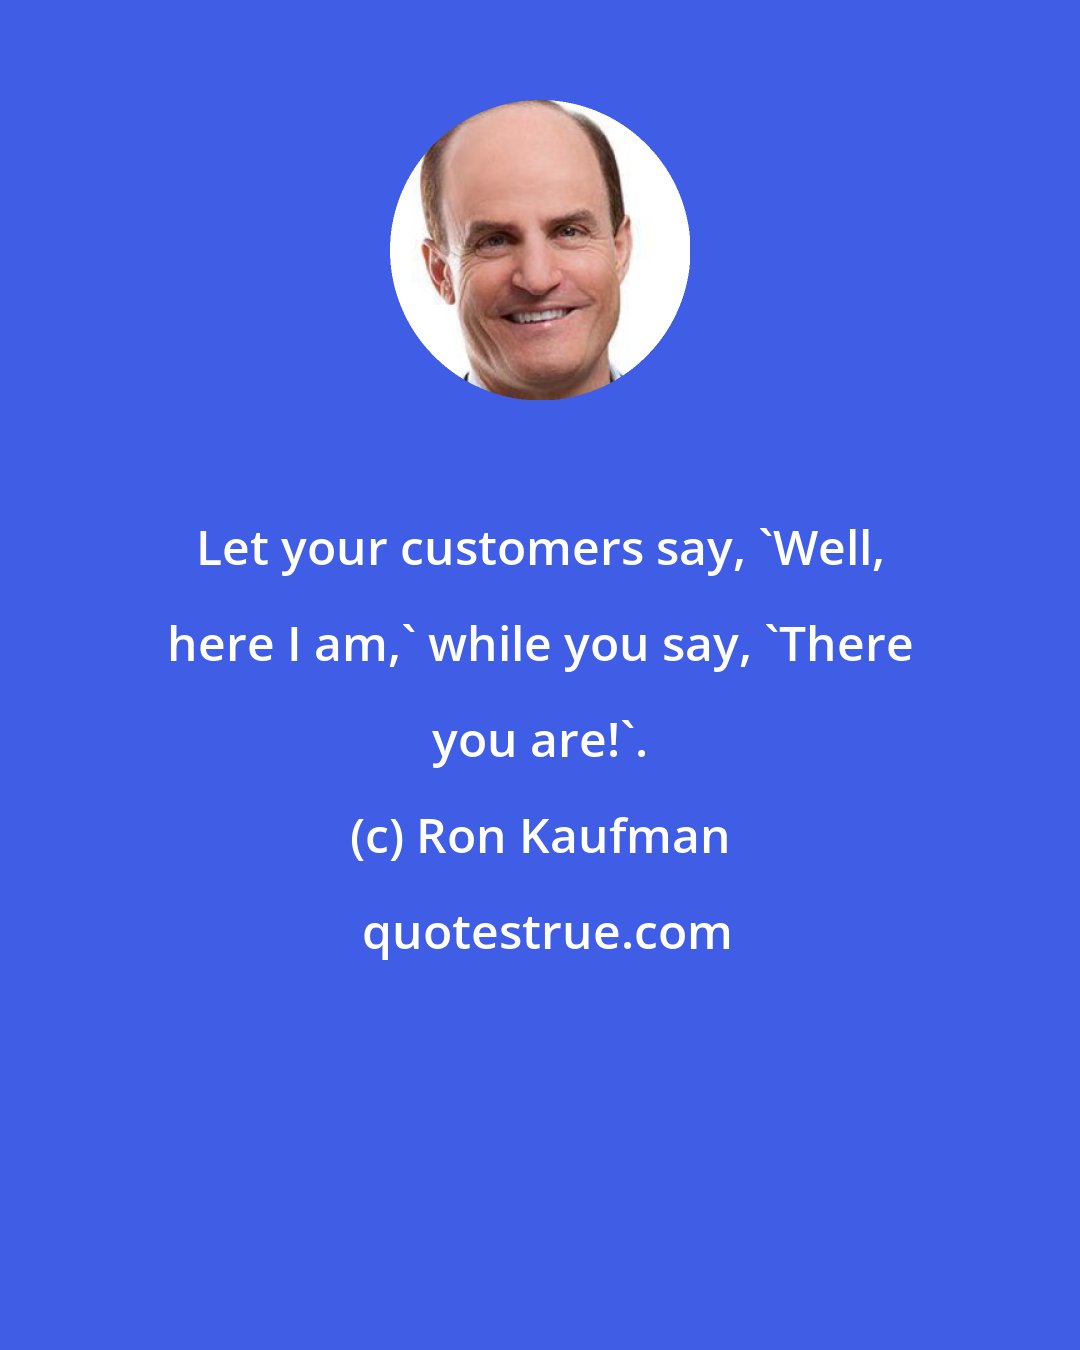 Ron Kaufman: Let your customers say, 'Well, here I am,' while you say, 'There you are!'.